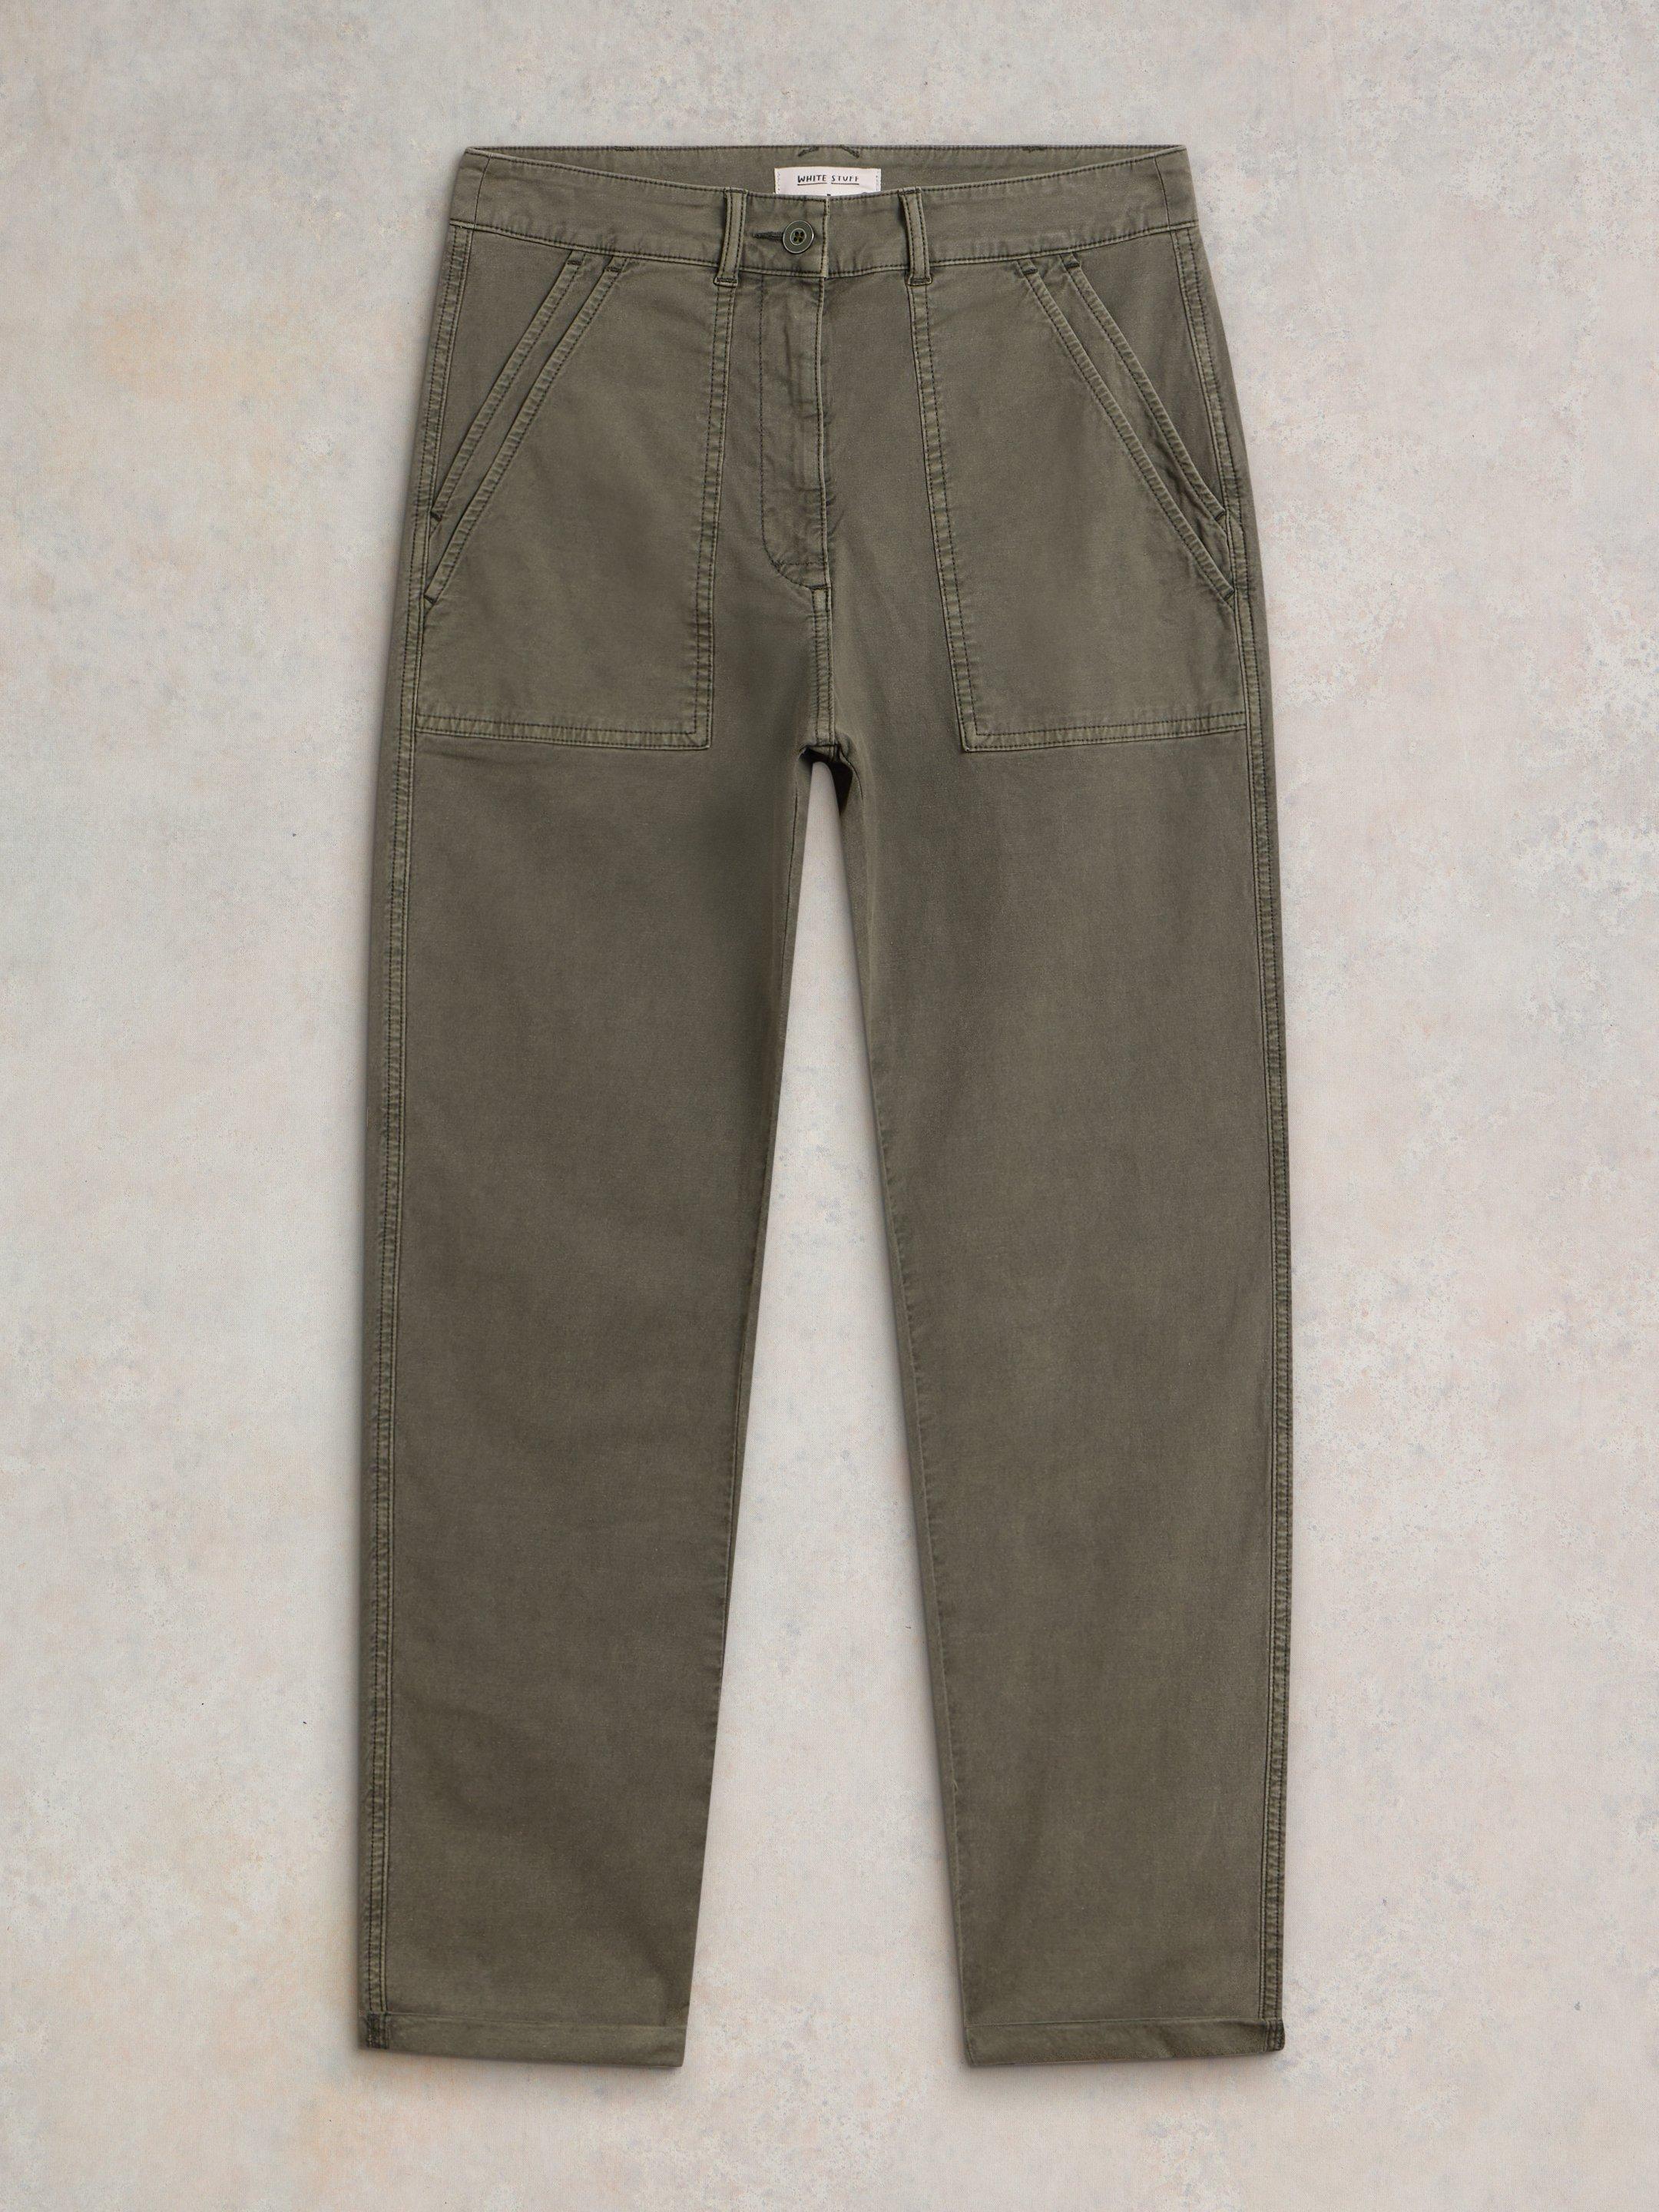 Twister Chino Trouser in KHAKI GRN - FLAT FRONT